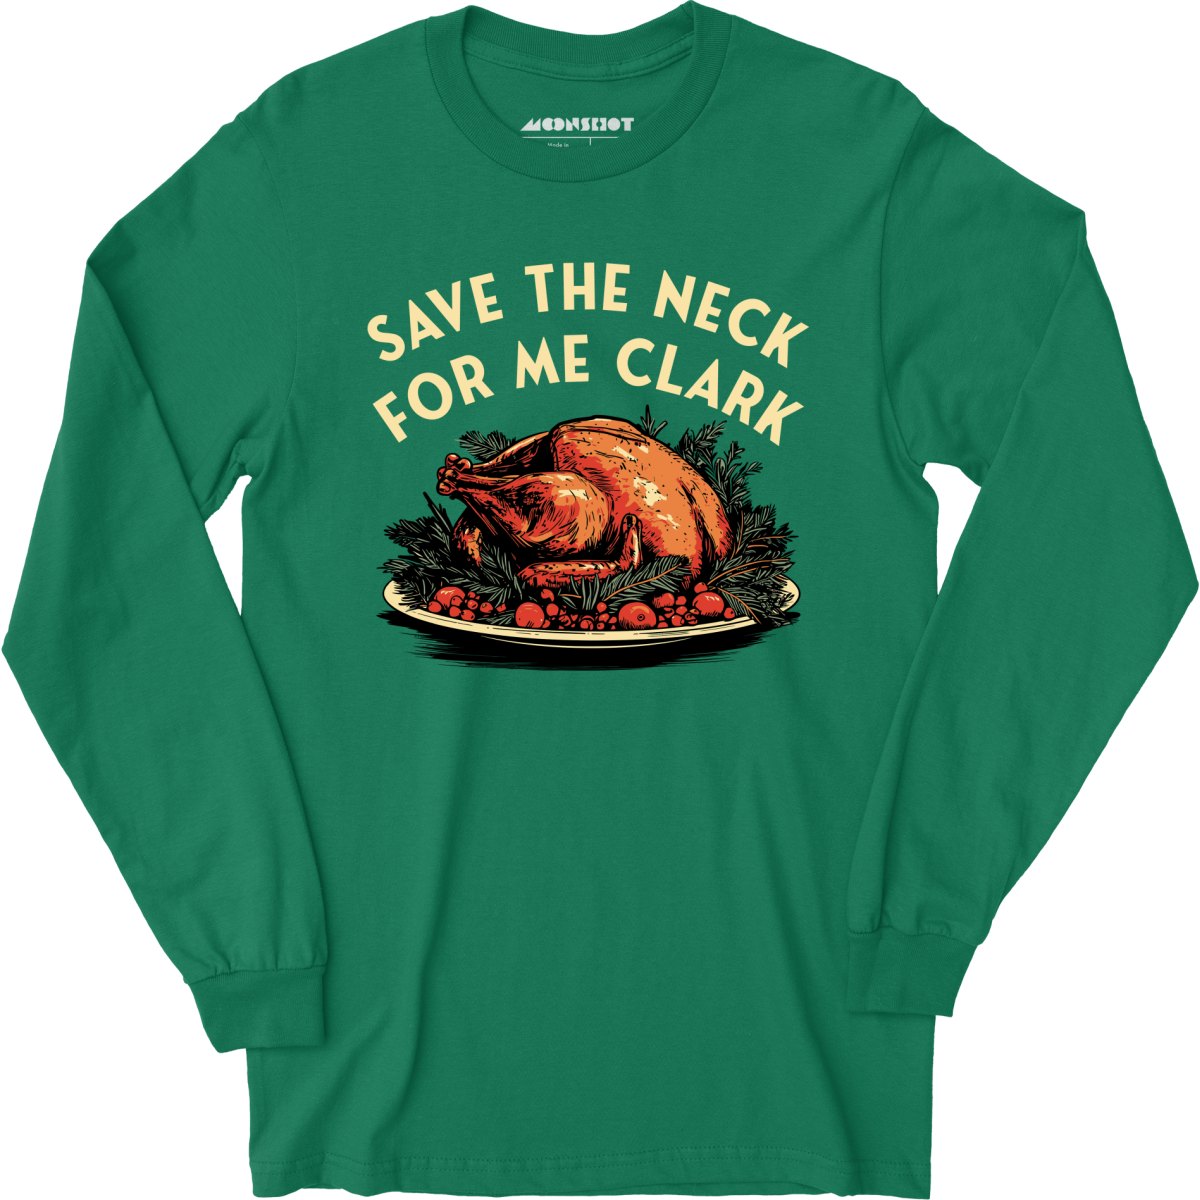 Save the Neck For Me Clark - Long Sleeve T-Shirt